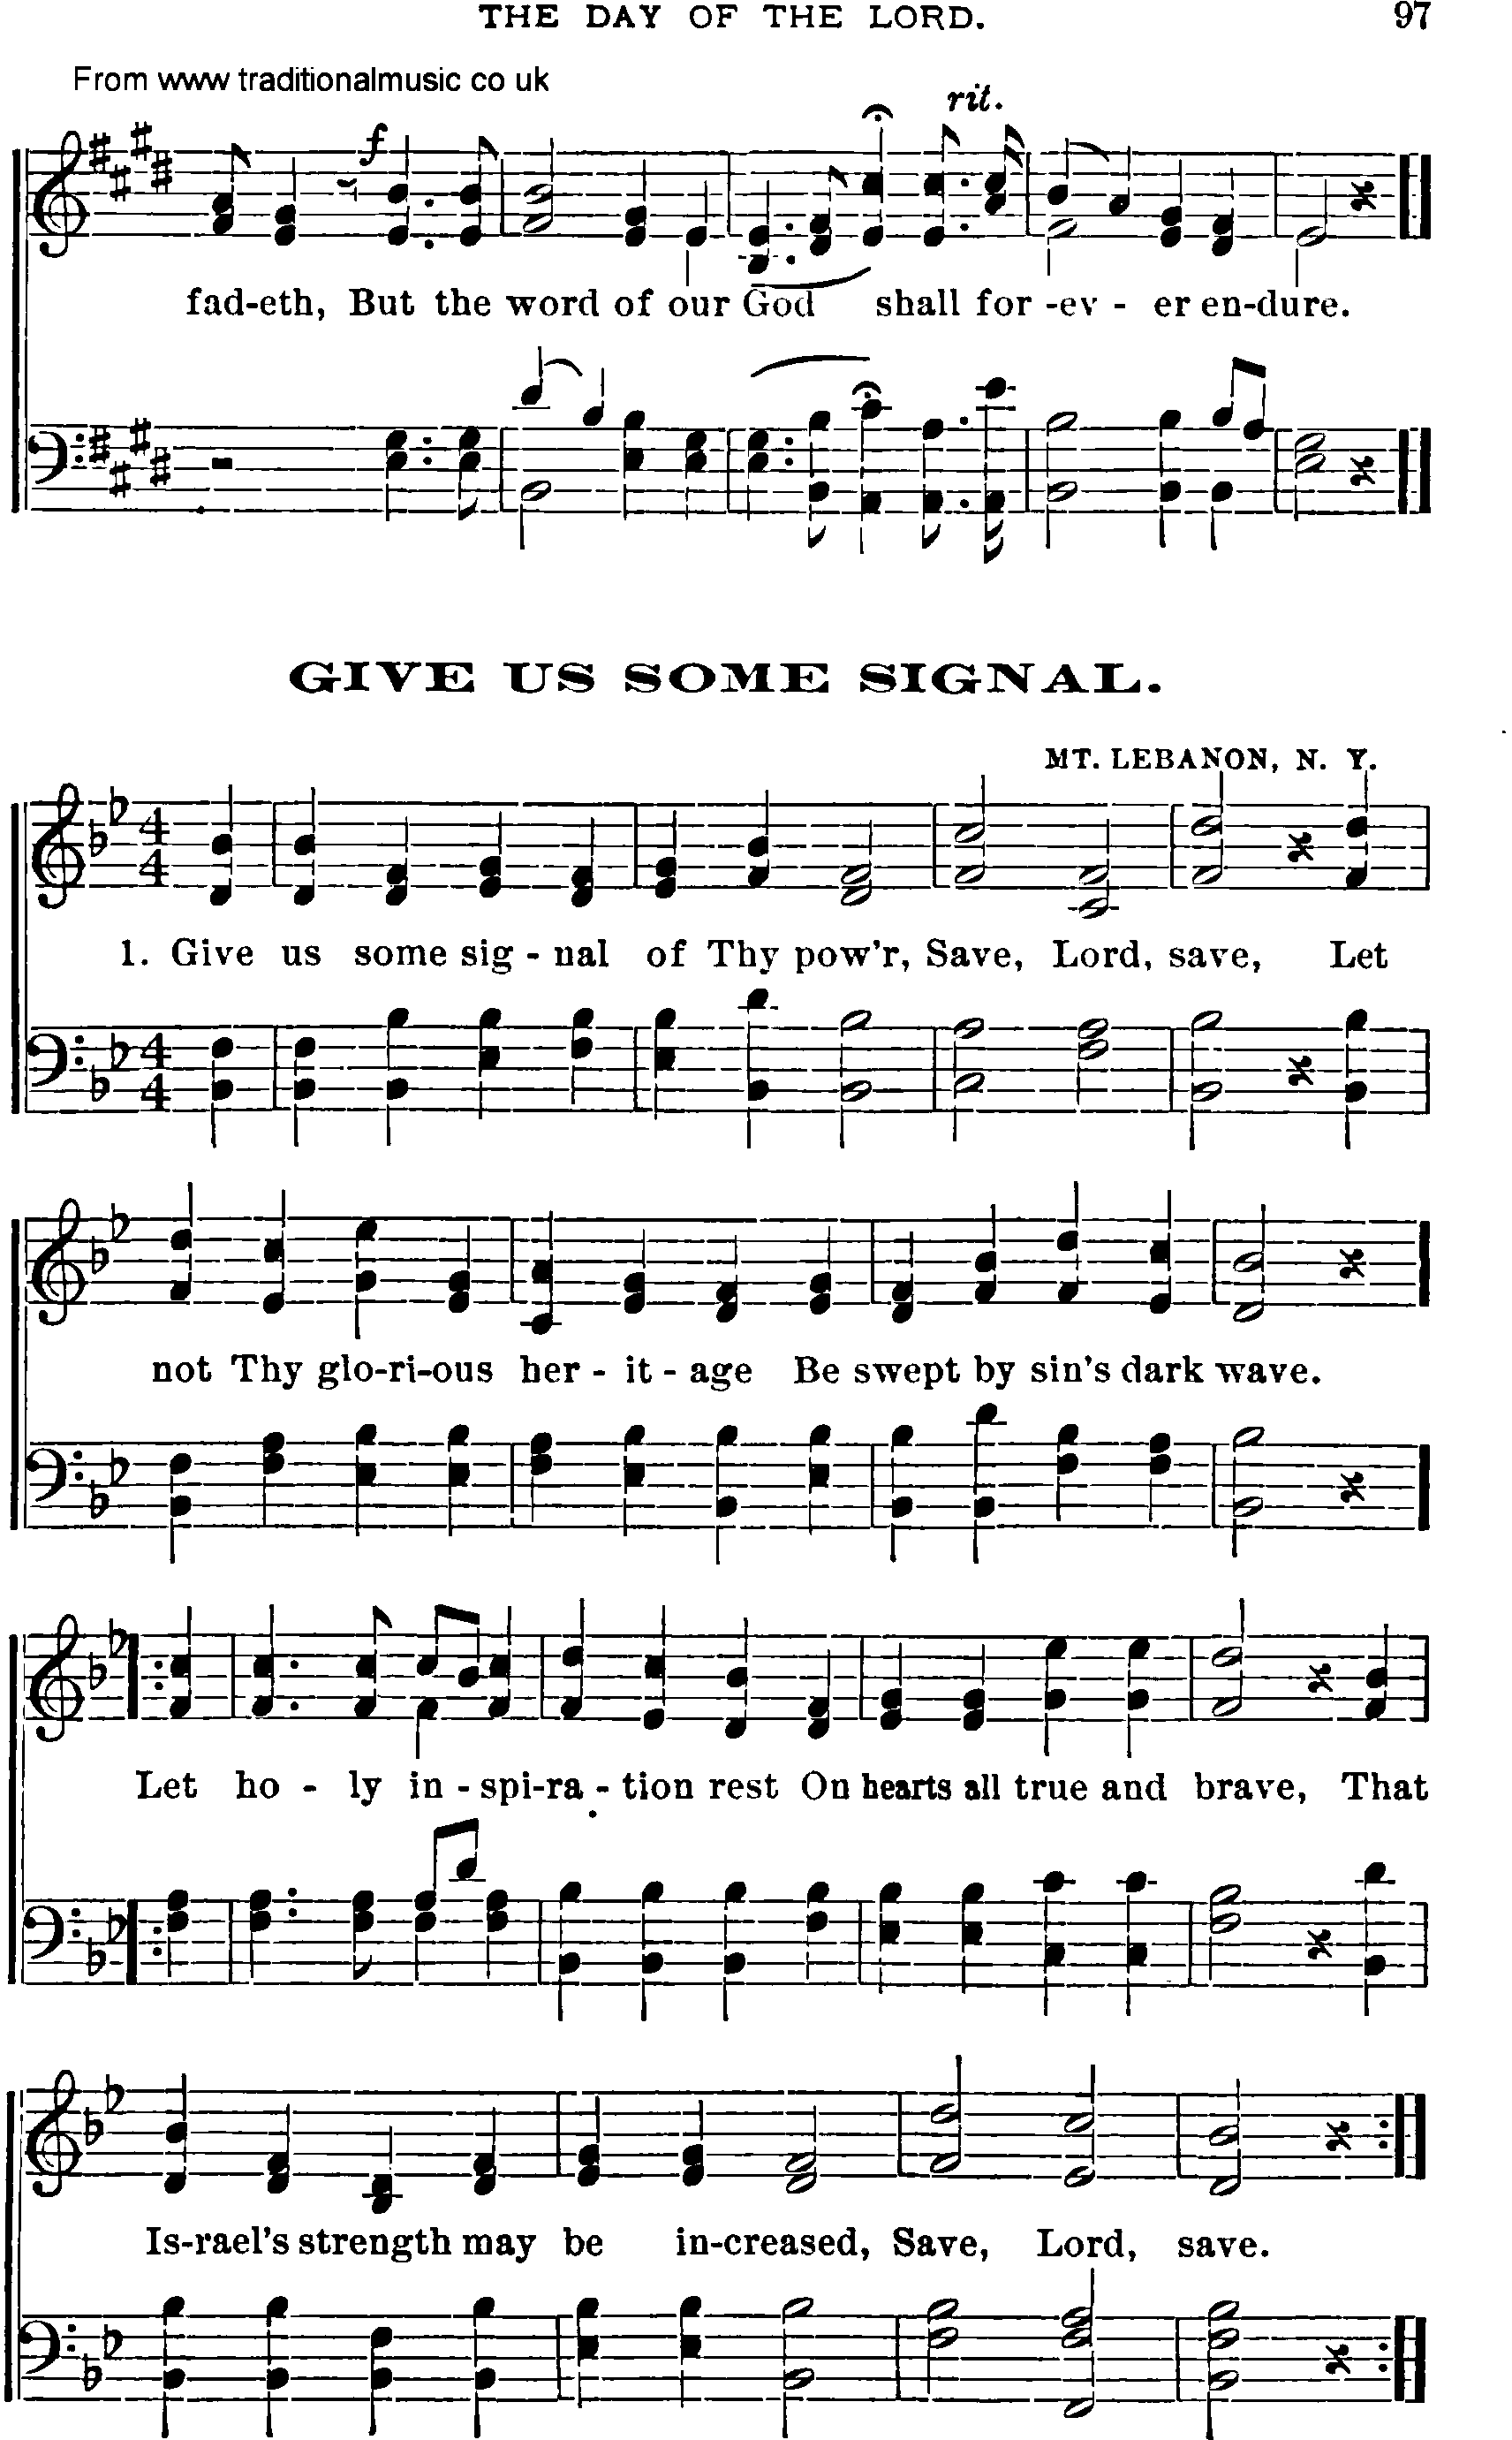 Shaker Music collection, Hymn: give us some signal, sheetmusic and PDF